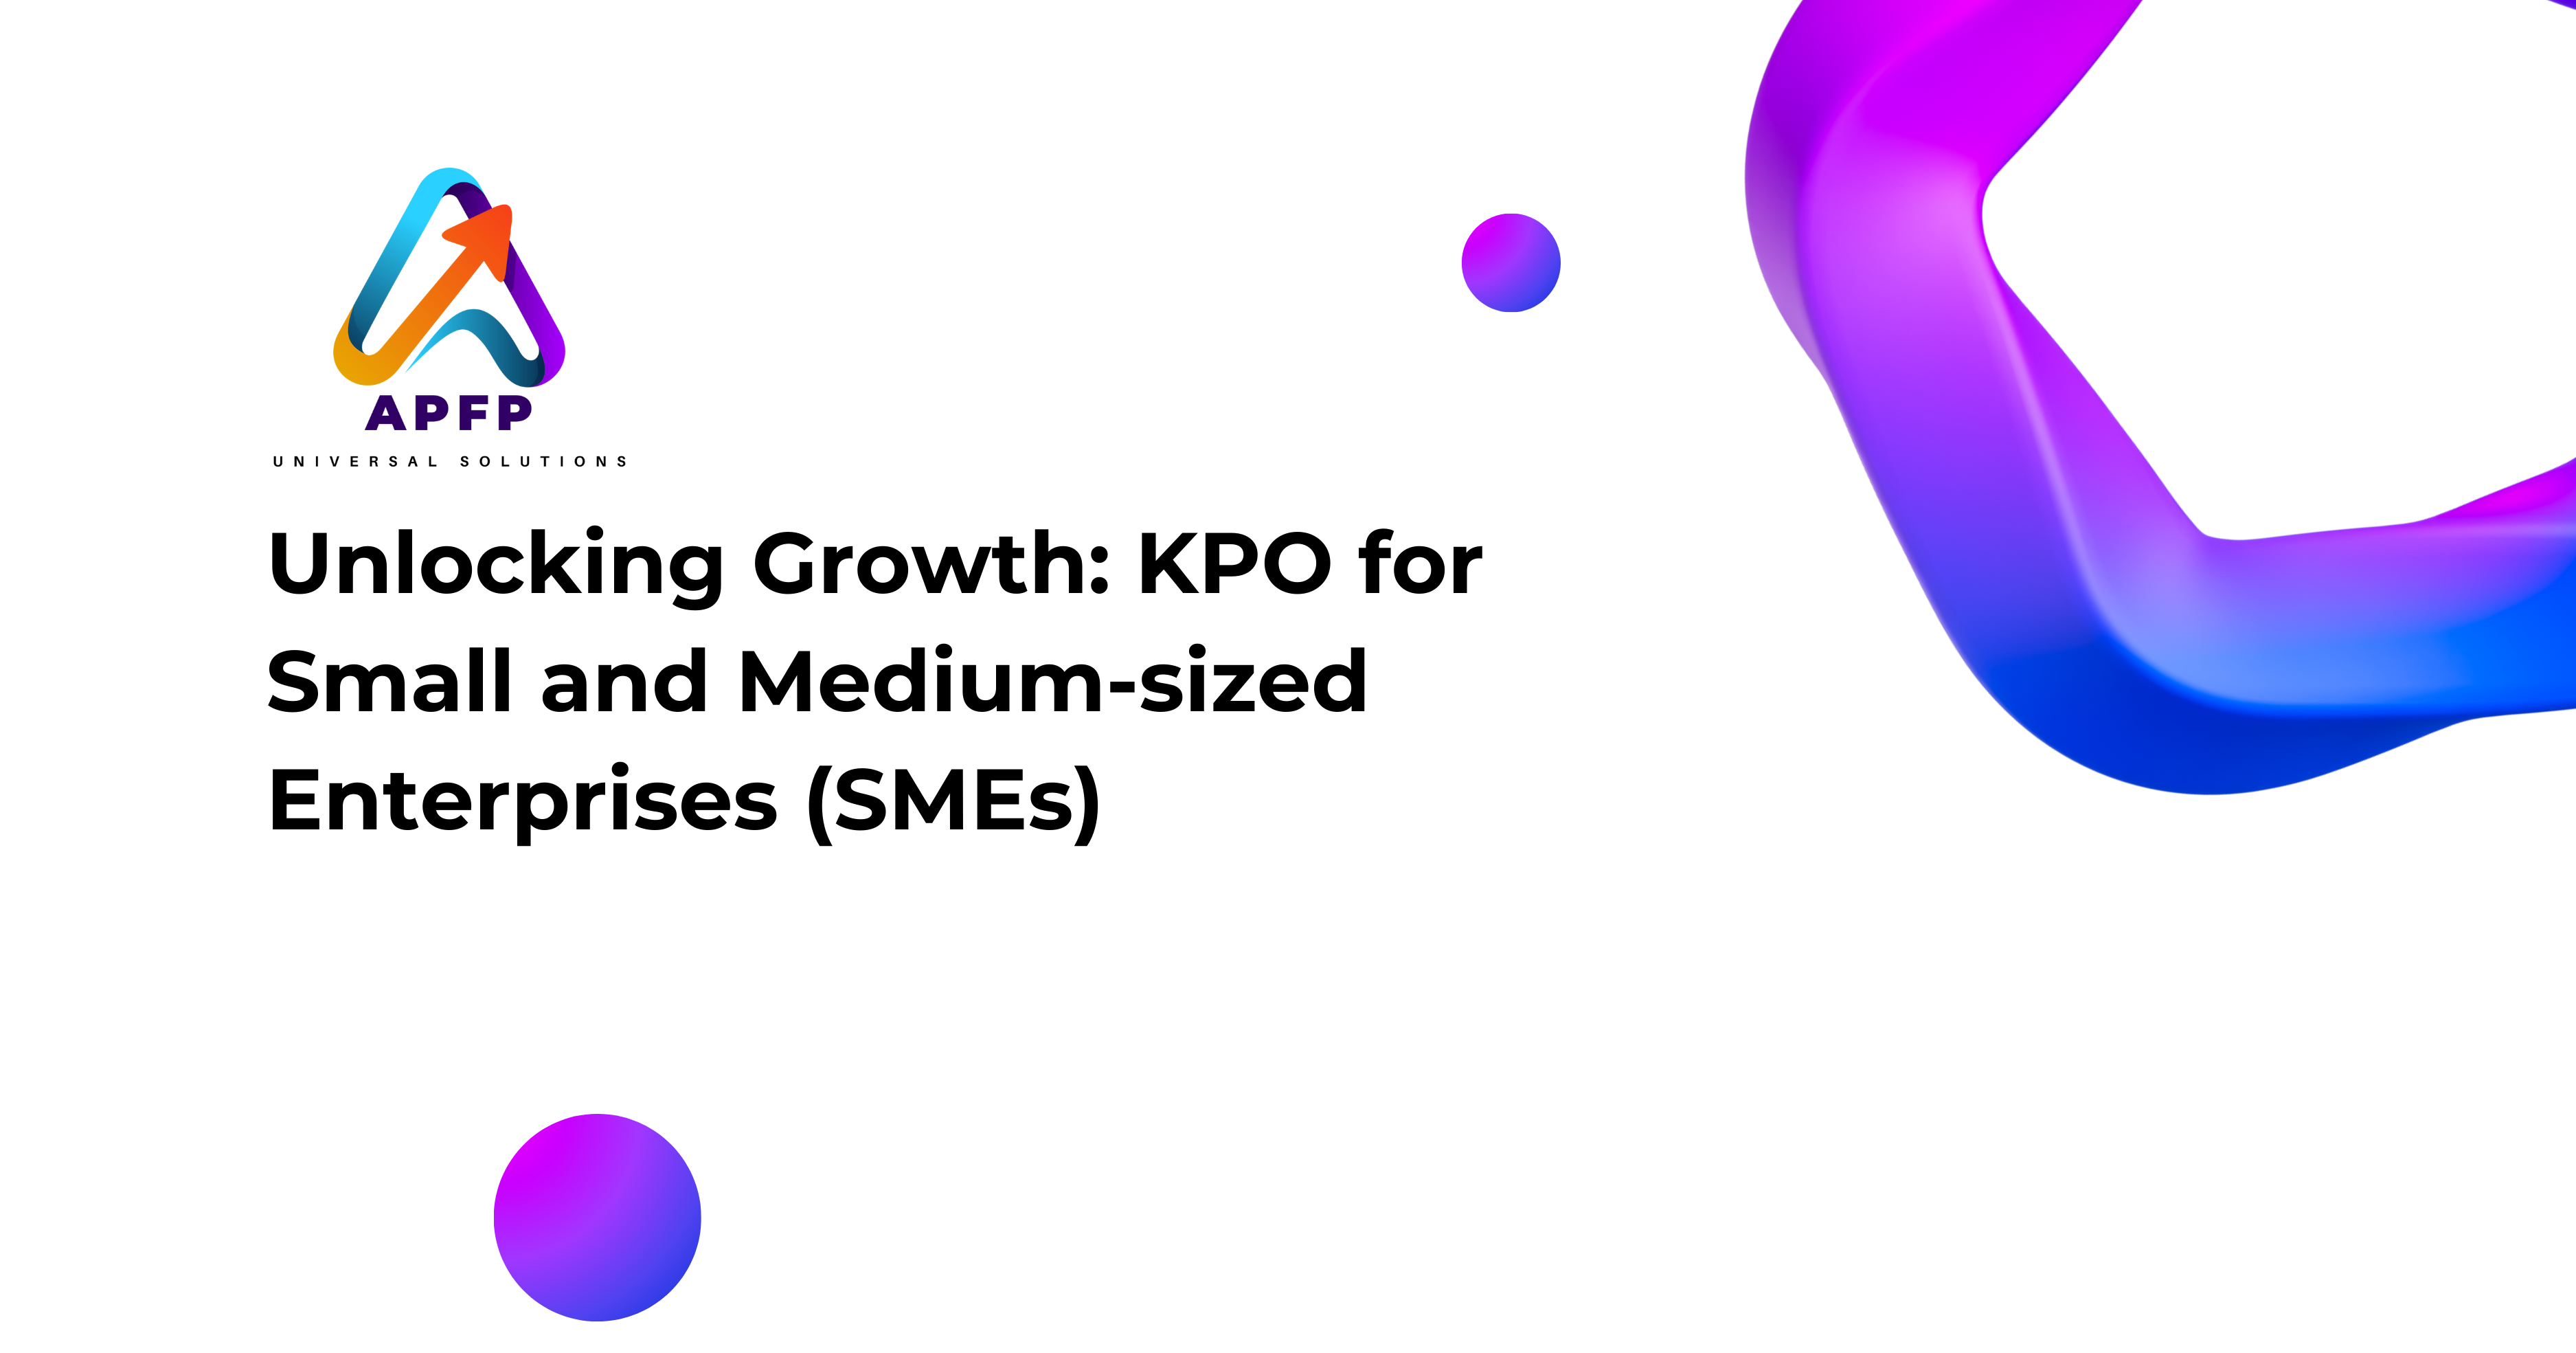 Unlocking Growth KPO for Small and Medium-sized Enterprises (SMEs)